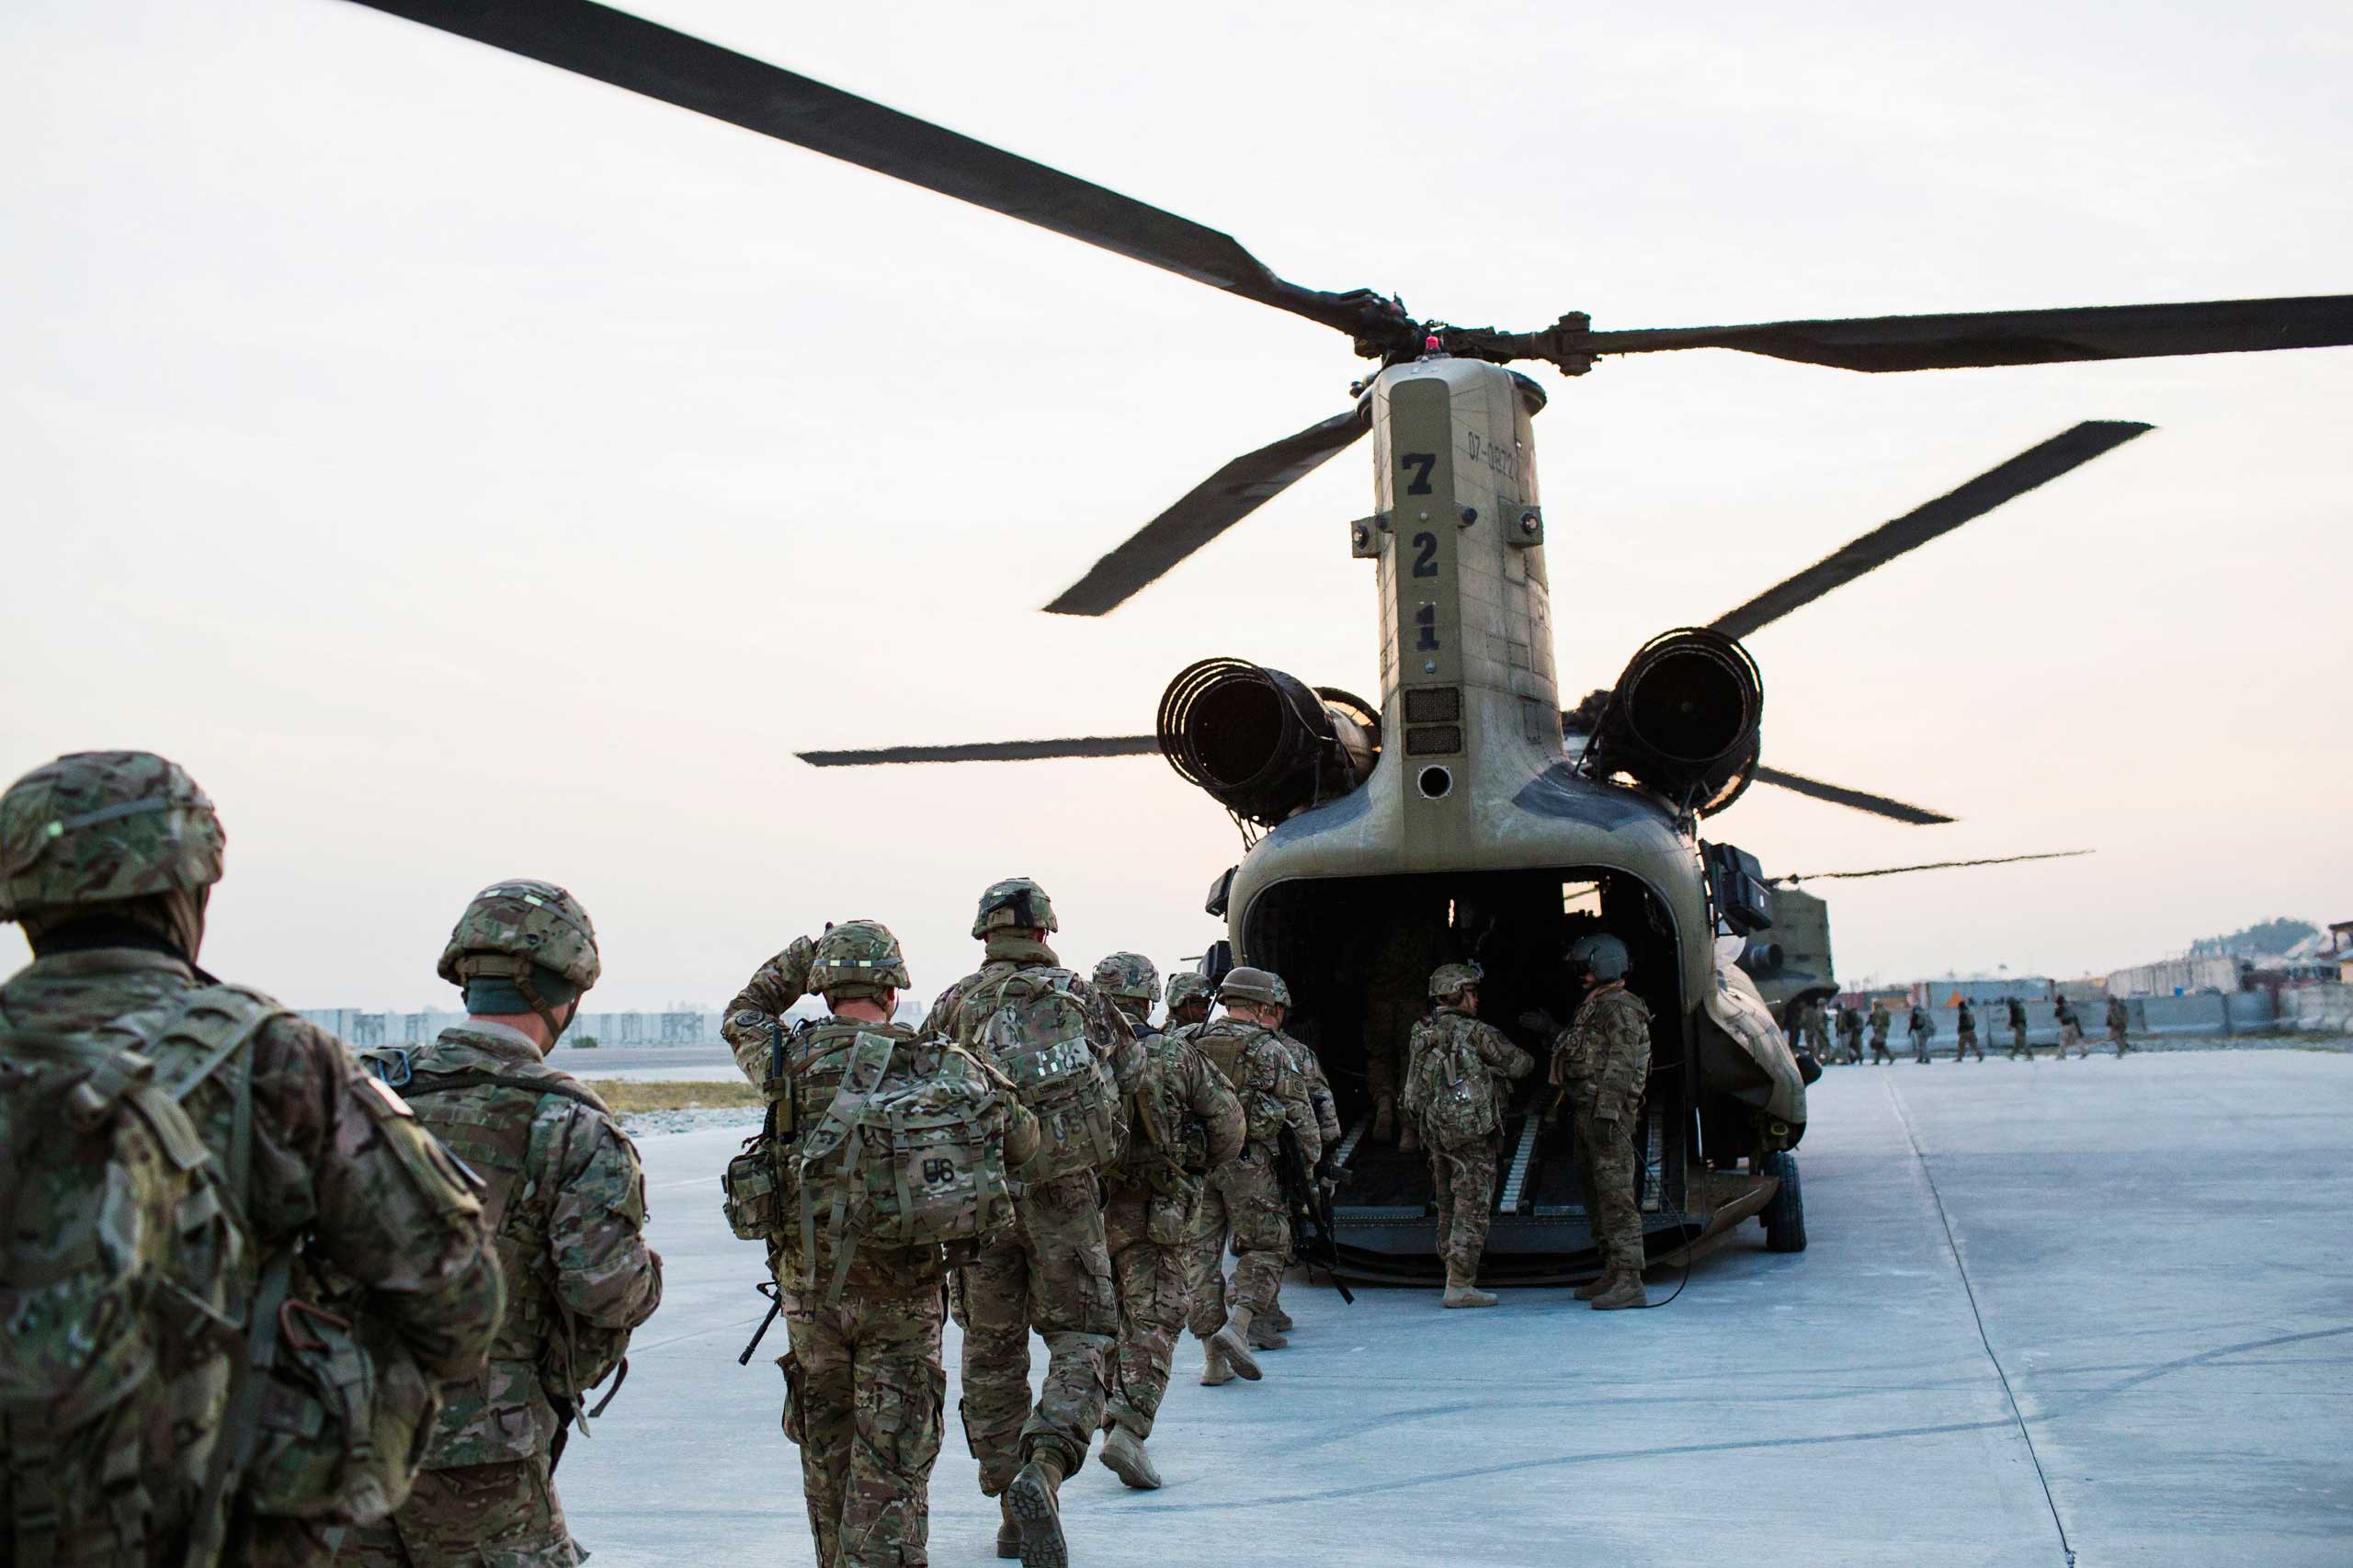 U.S. soldiers from the 3rd Cavalry Regiment load into a CH-47 Chinook helicopter for an advising mission to an Afghan National Army base at forward operating base Fenty in the Nangarhar province of Afghanistan on Dec. 21, 2014.